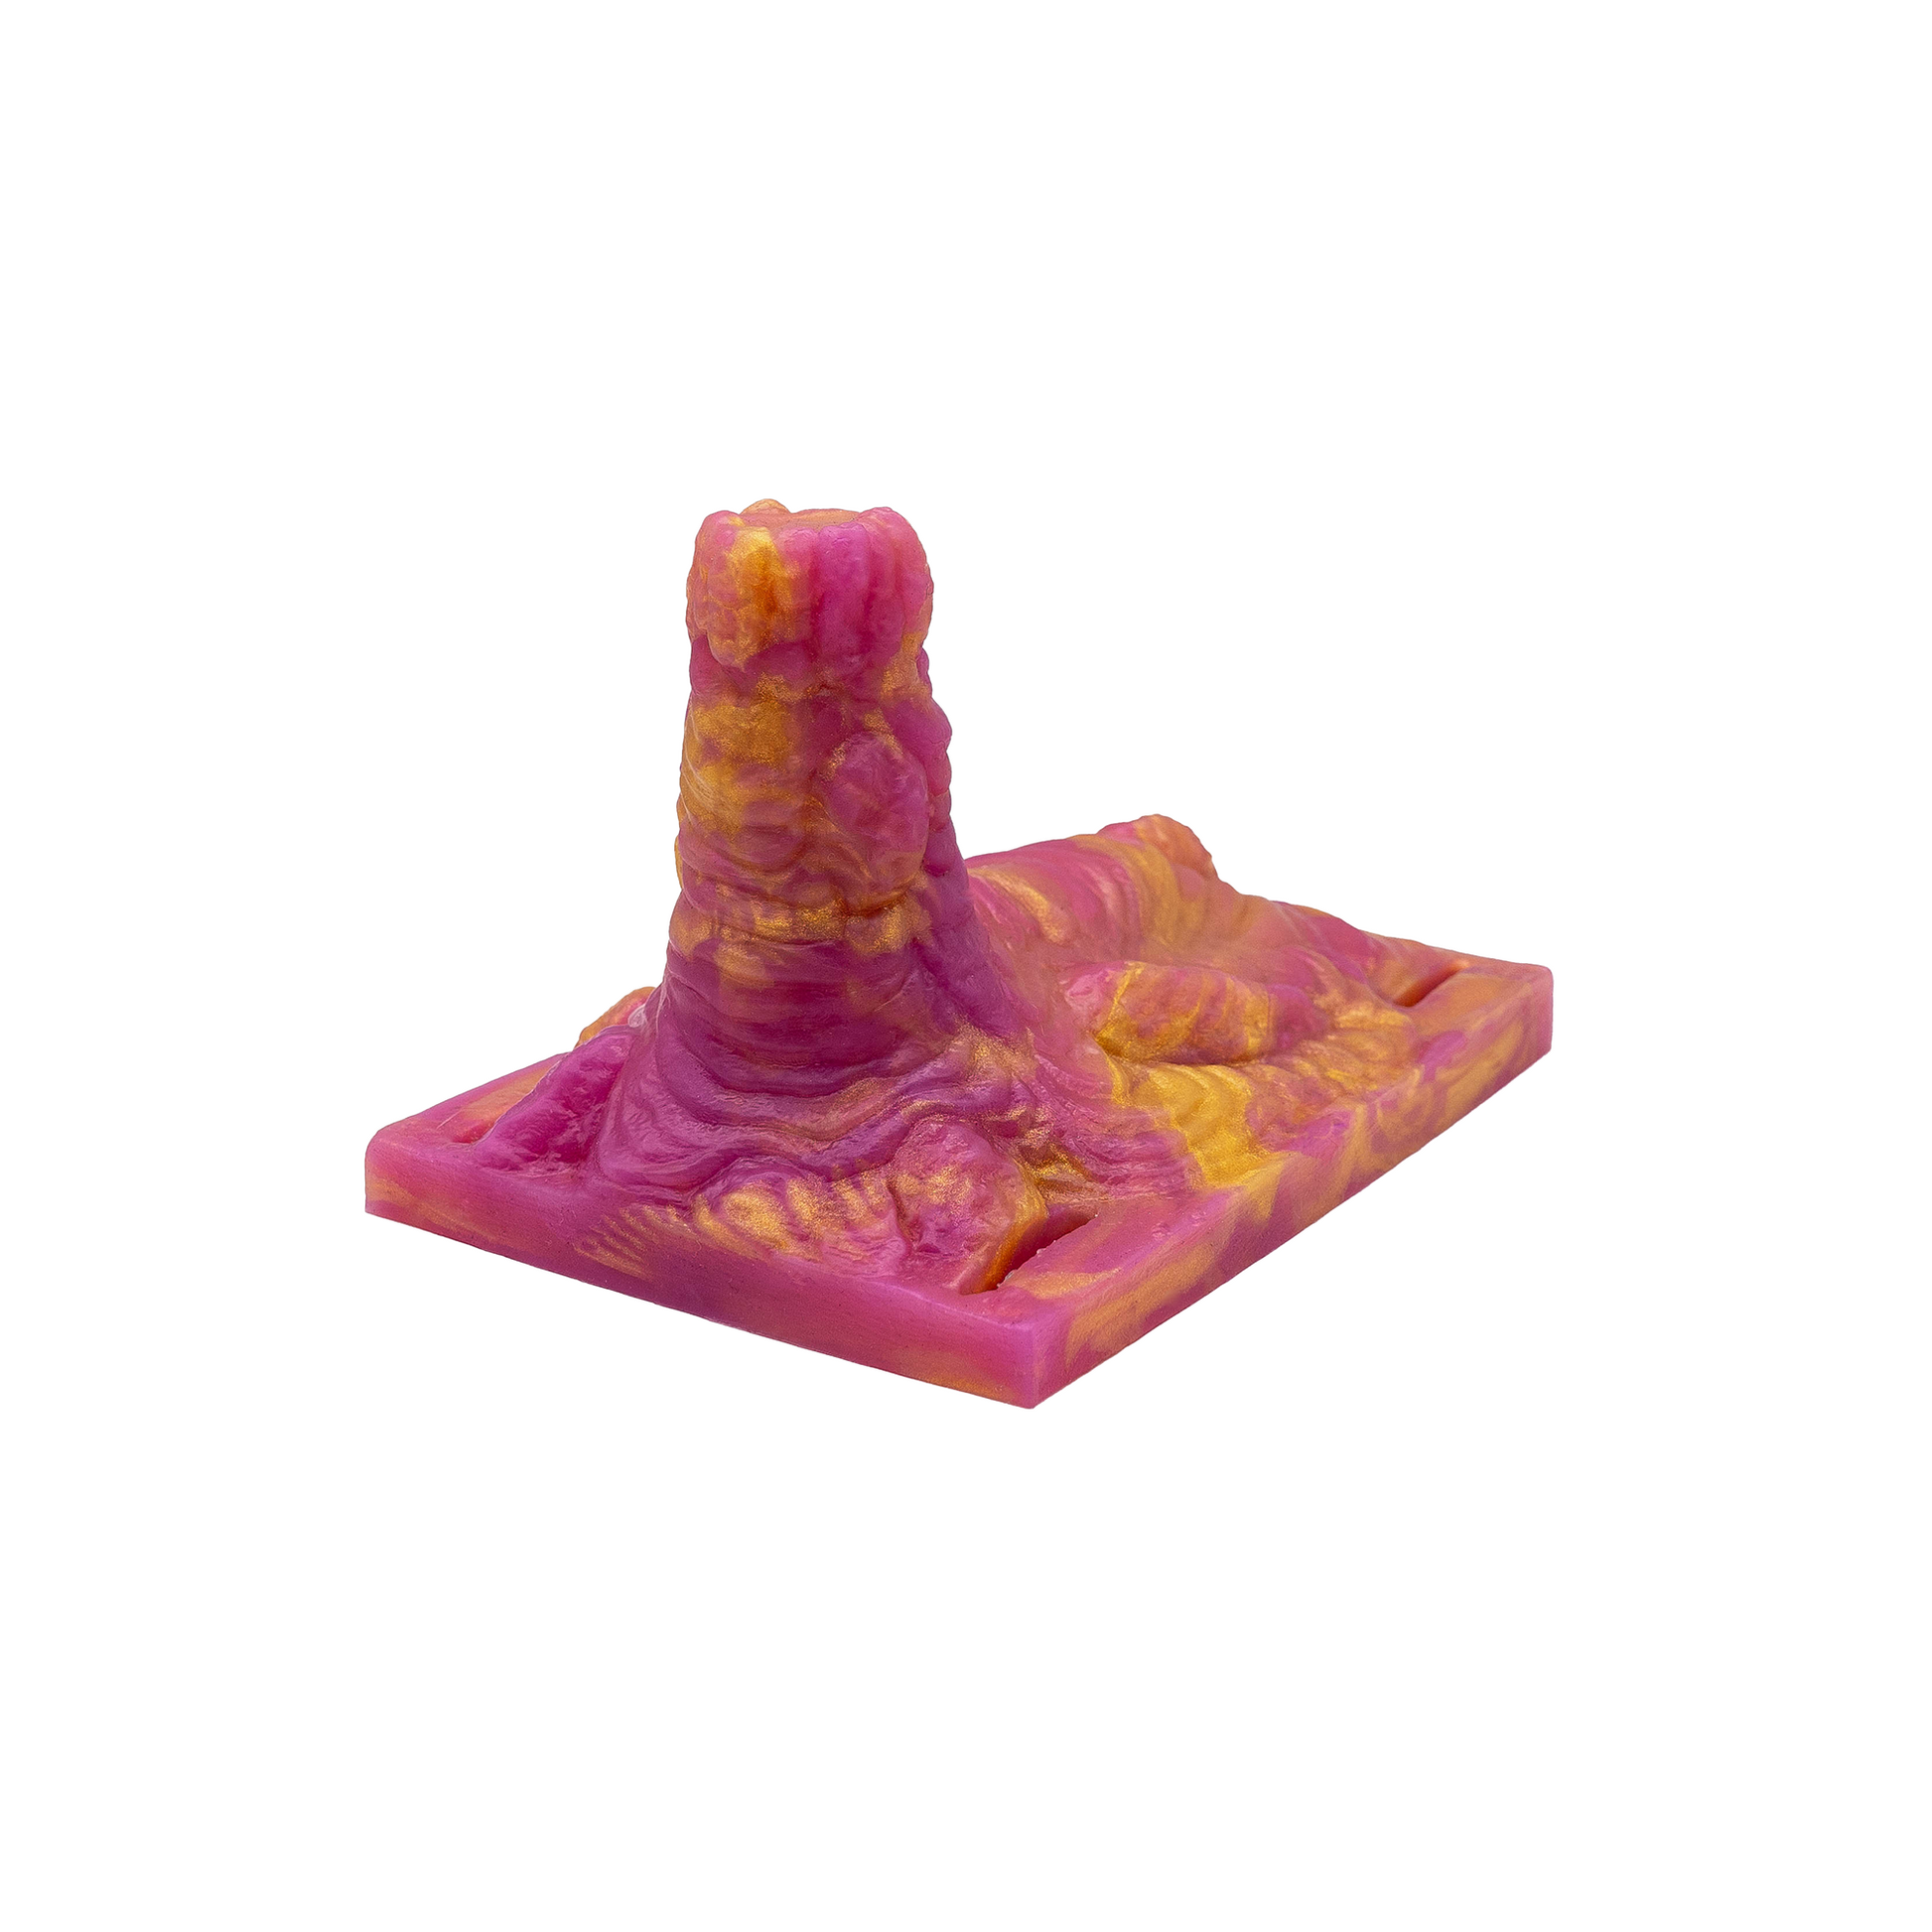 Mt. Fukmi is a volcano-inspired grinder sex toy. All grinder sex toys are handmade with body-safe platinum-grade silicone. 